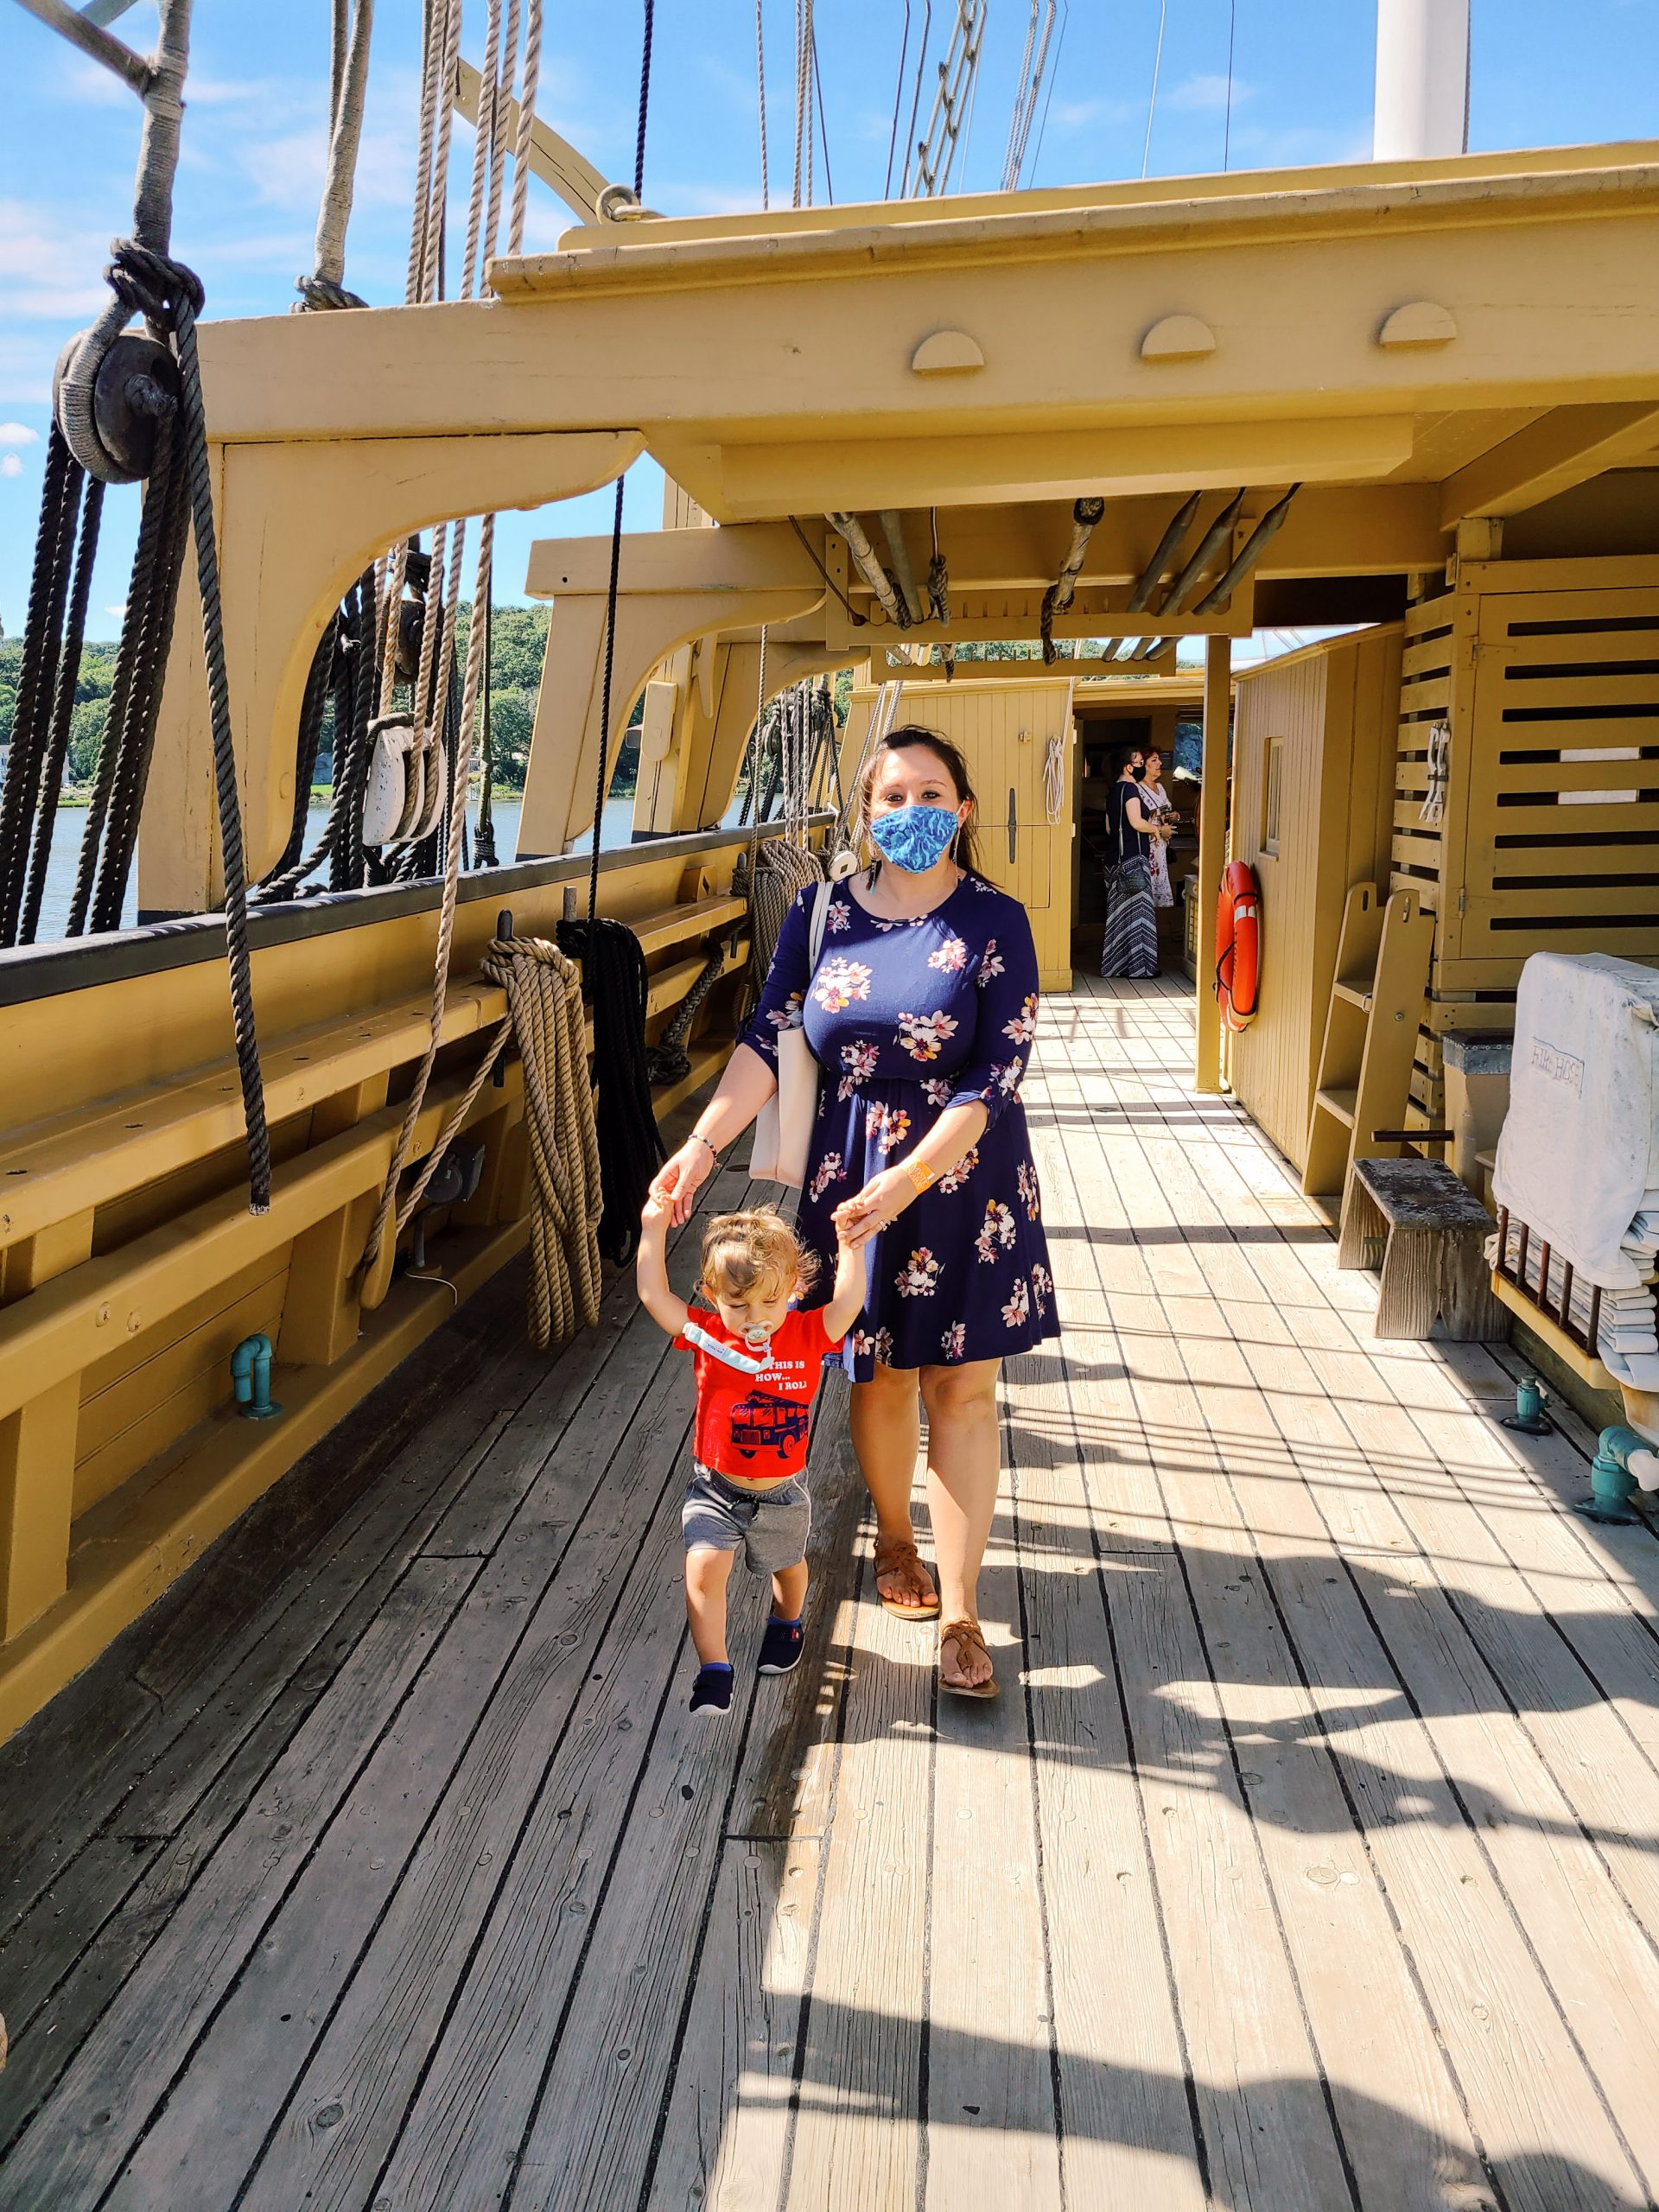 A woman and a child on the deck of ship at the Seaport Museum in Mystic, Connecticut